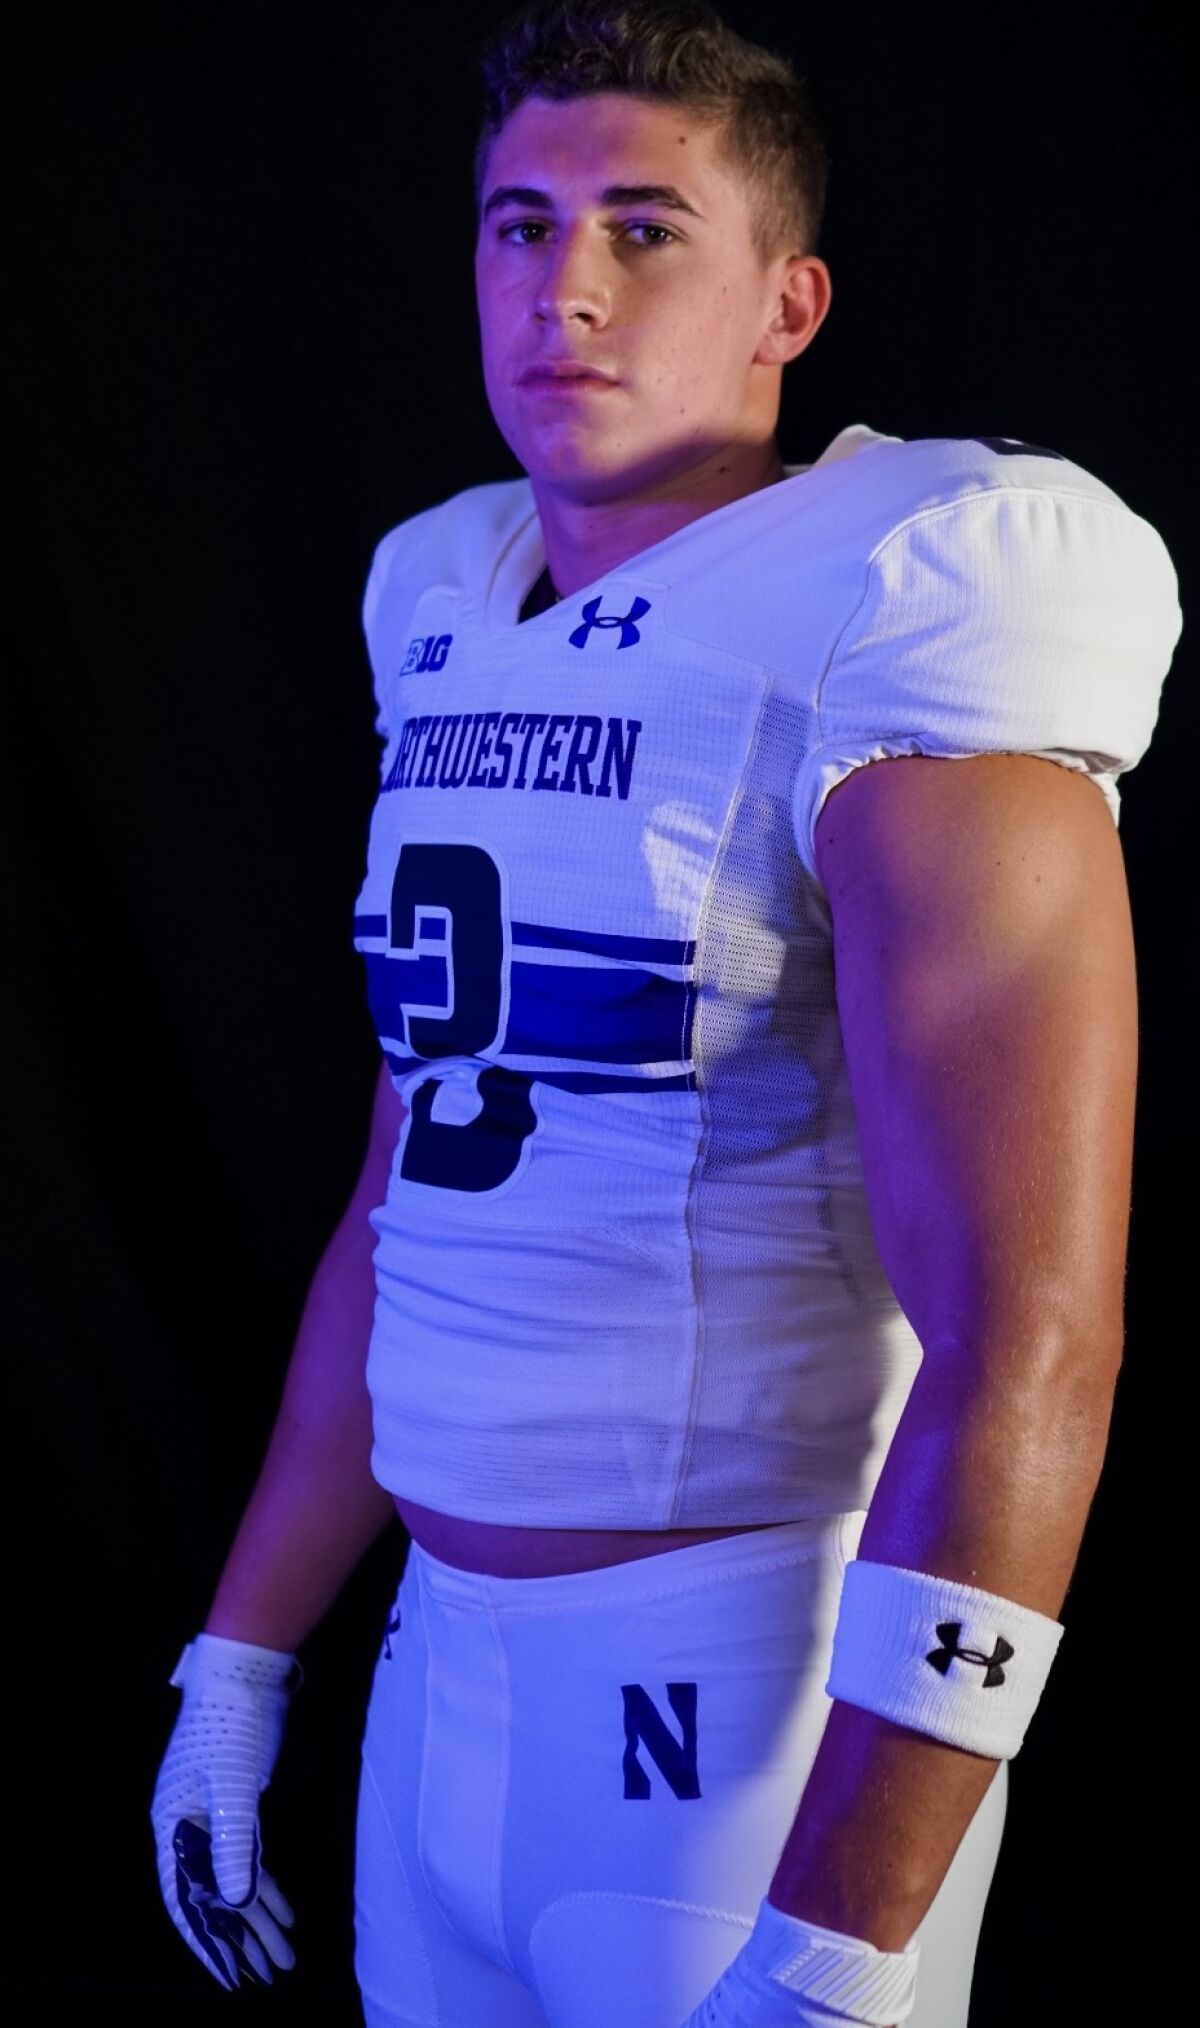 Glendora High linebacker Braydon Brus poses for a photo in a Northwestern jersey, the college to which he committed.